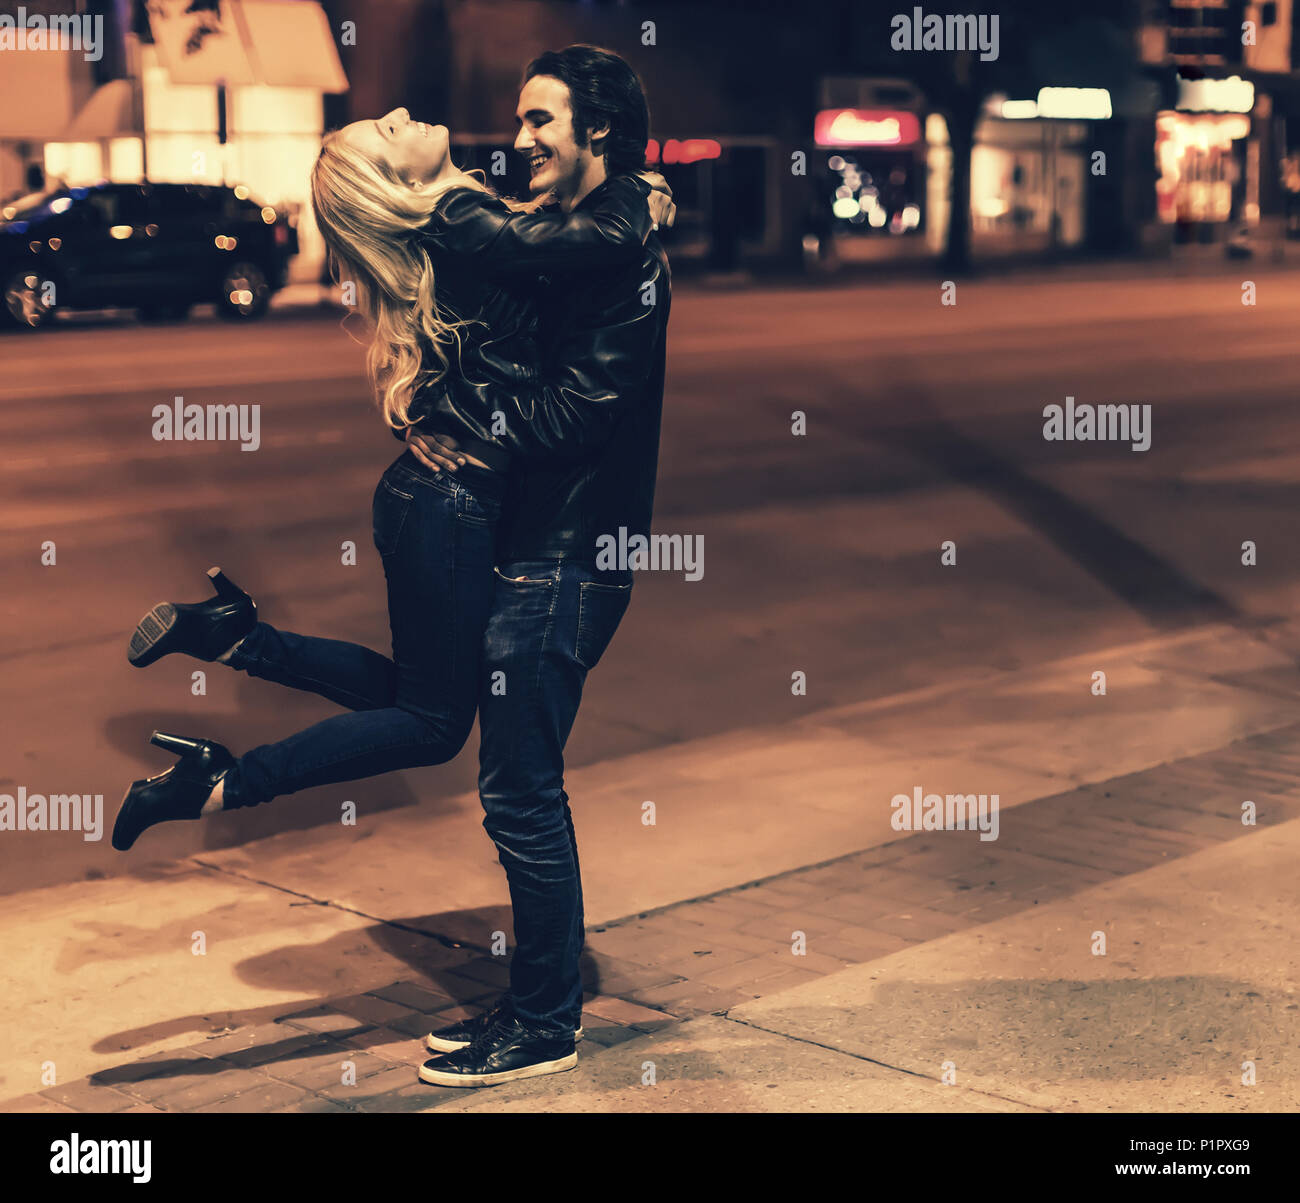 A young couple wearing black leather jackets being playful on a city sidewalk at night; Edmonton, Alberta, Canada Stock Photo